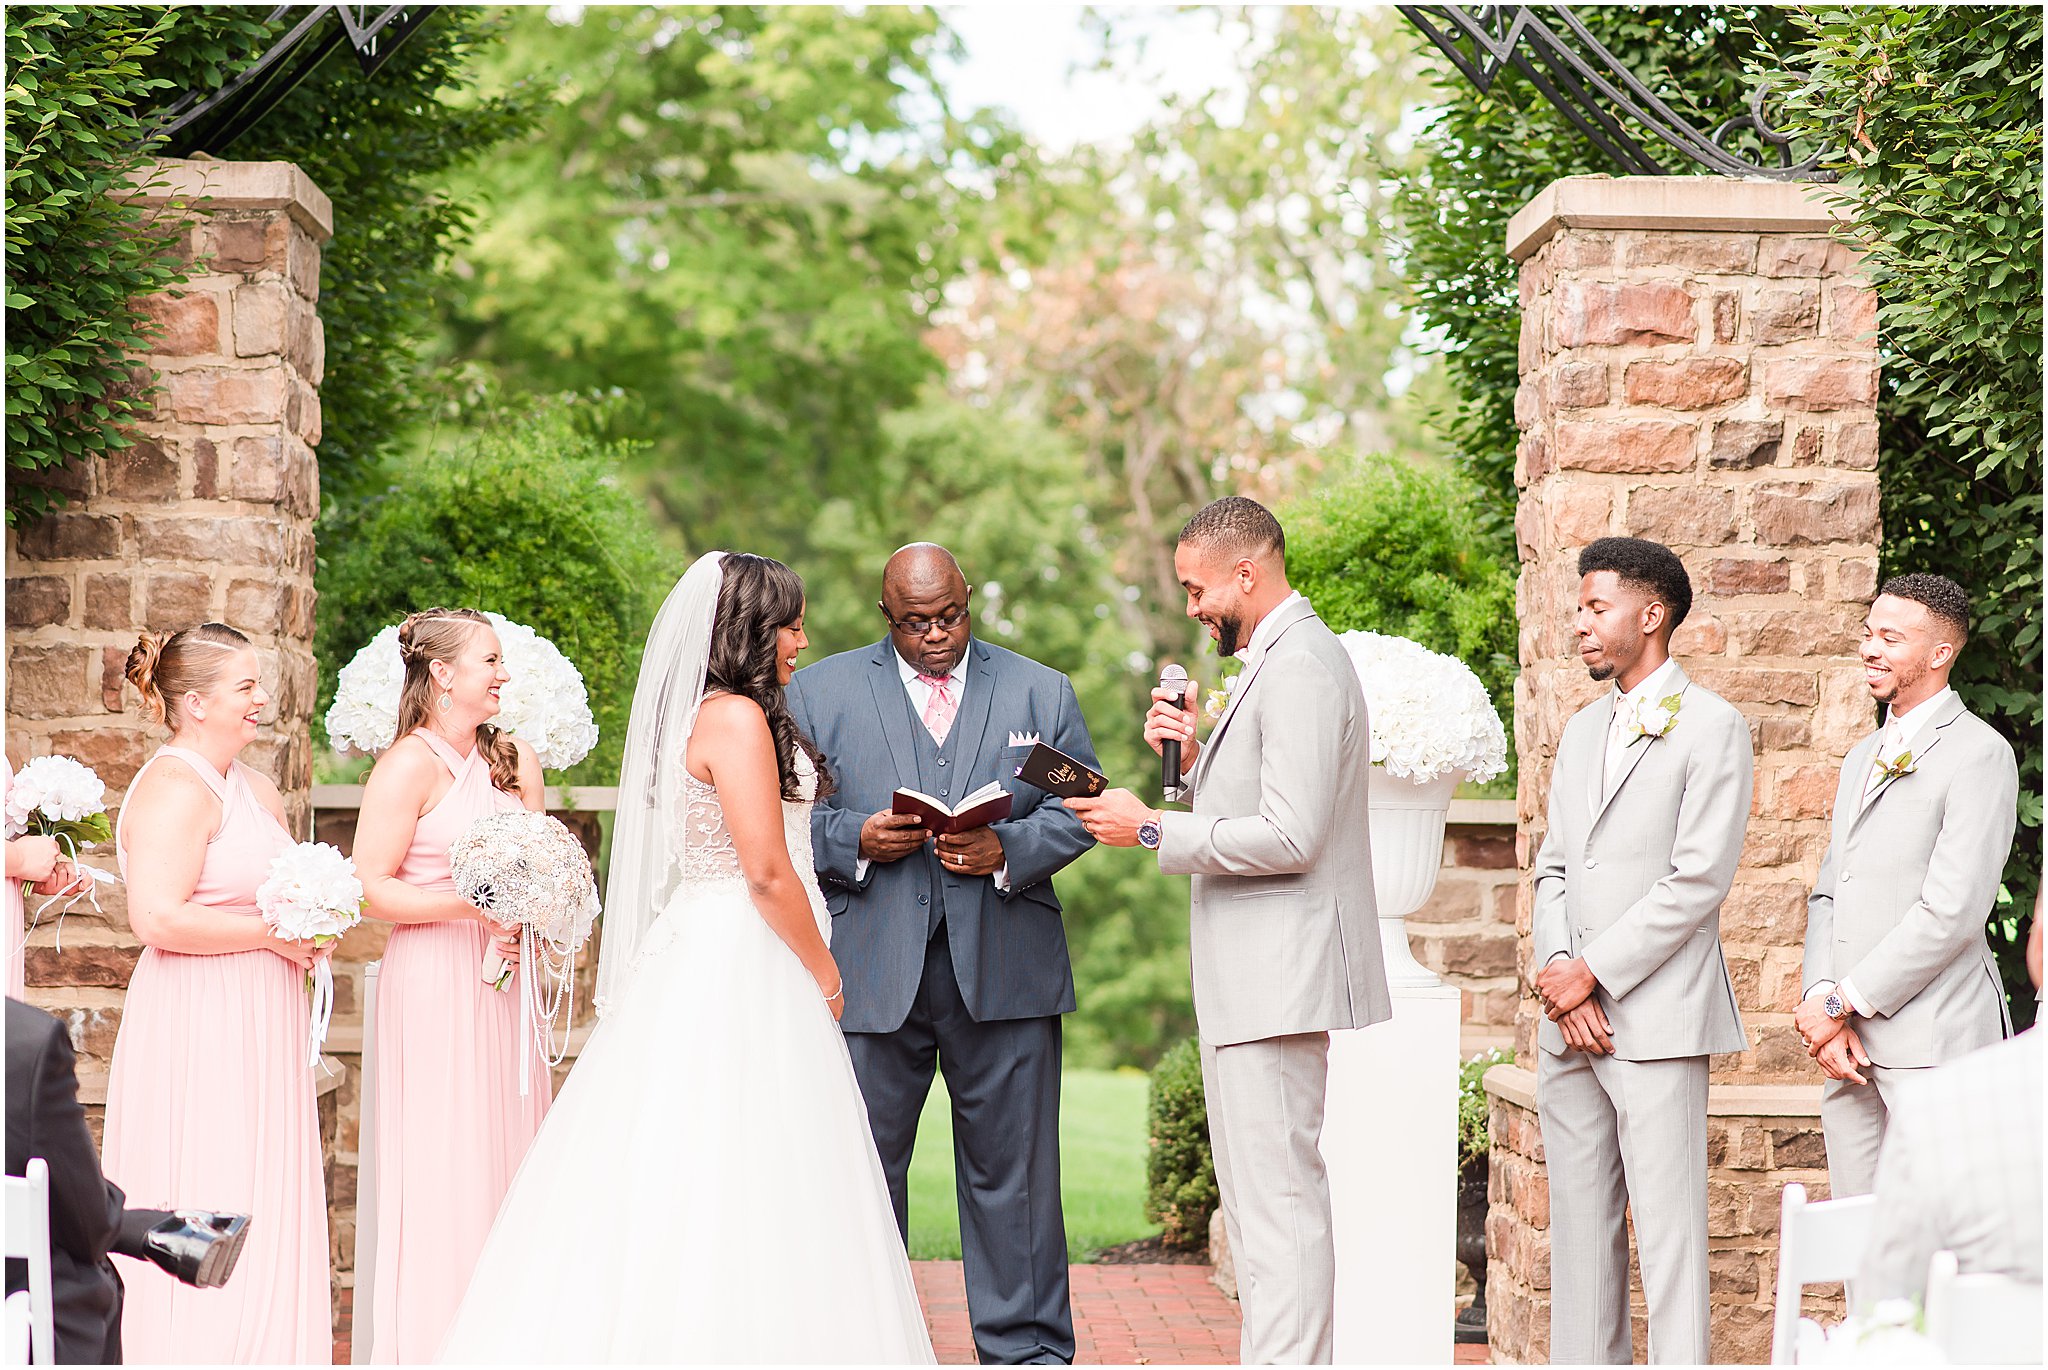 Outdoor ceremony at Pinnacle Golf Club | Courtney Carney Photography